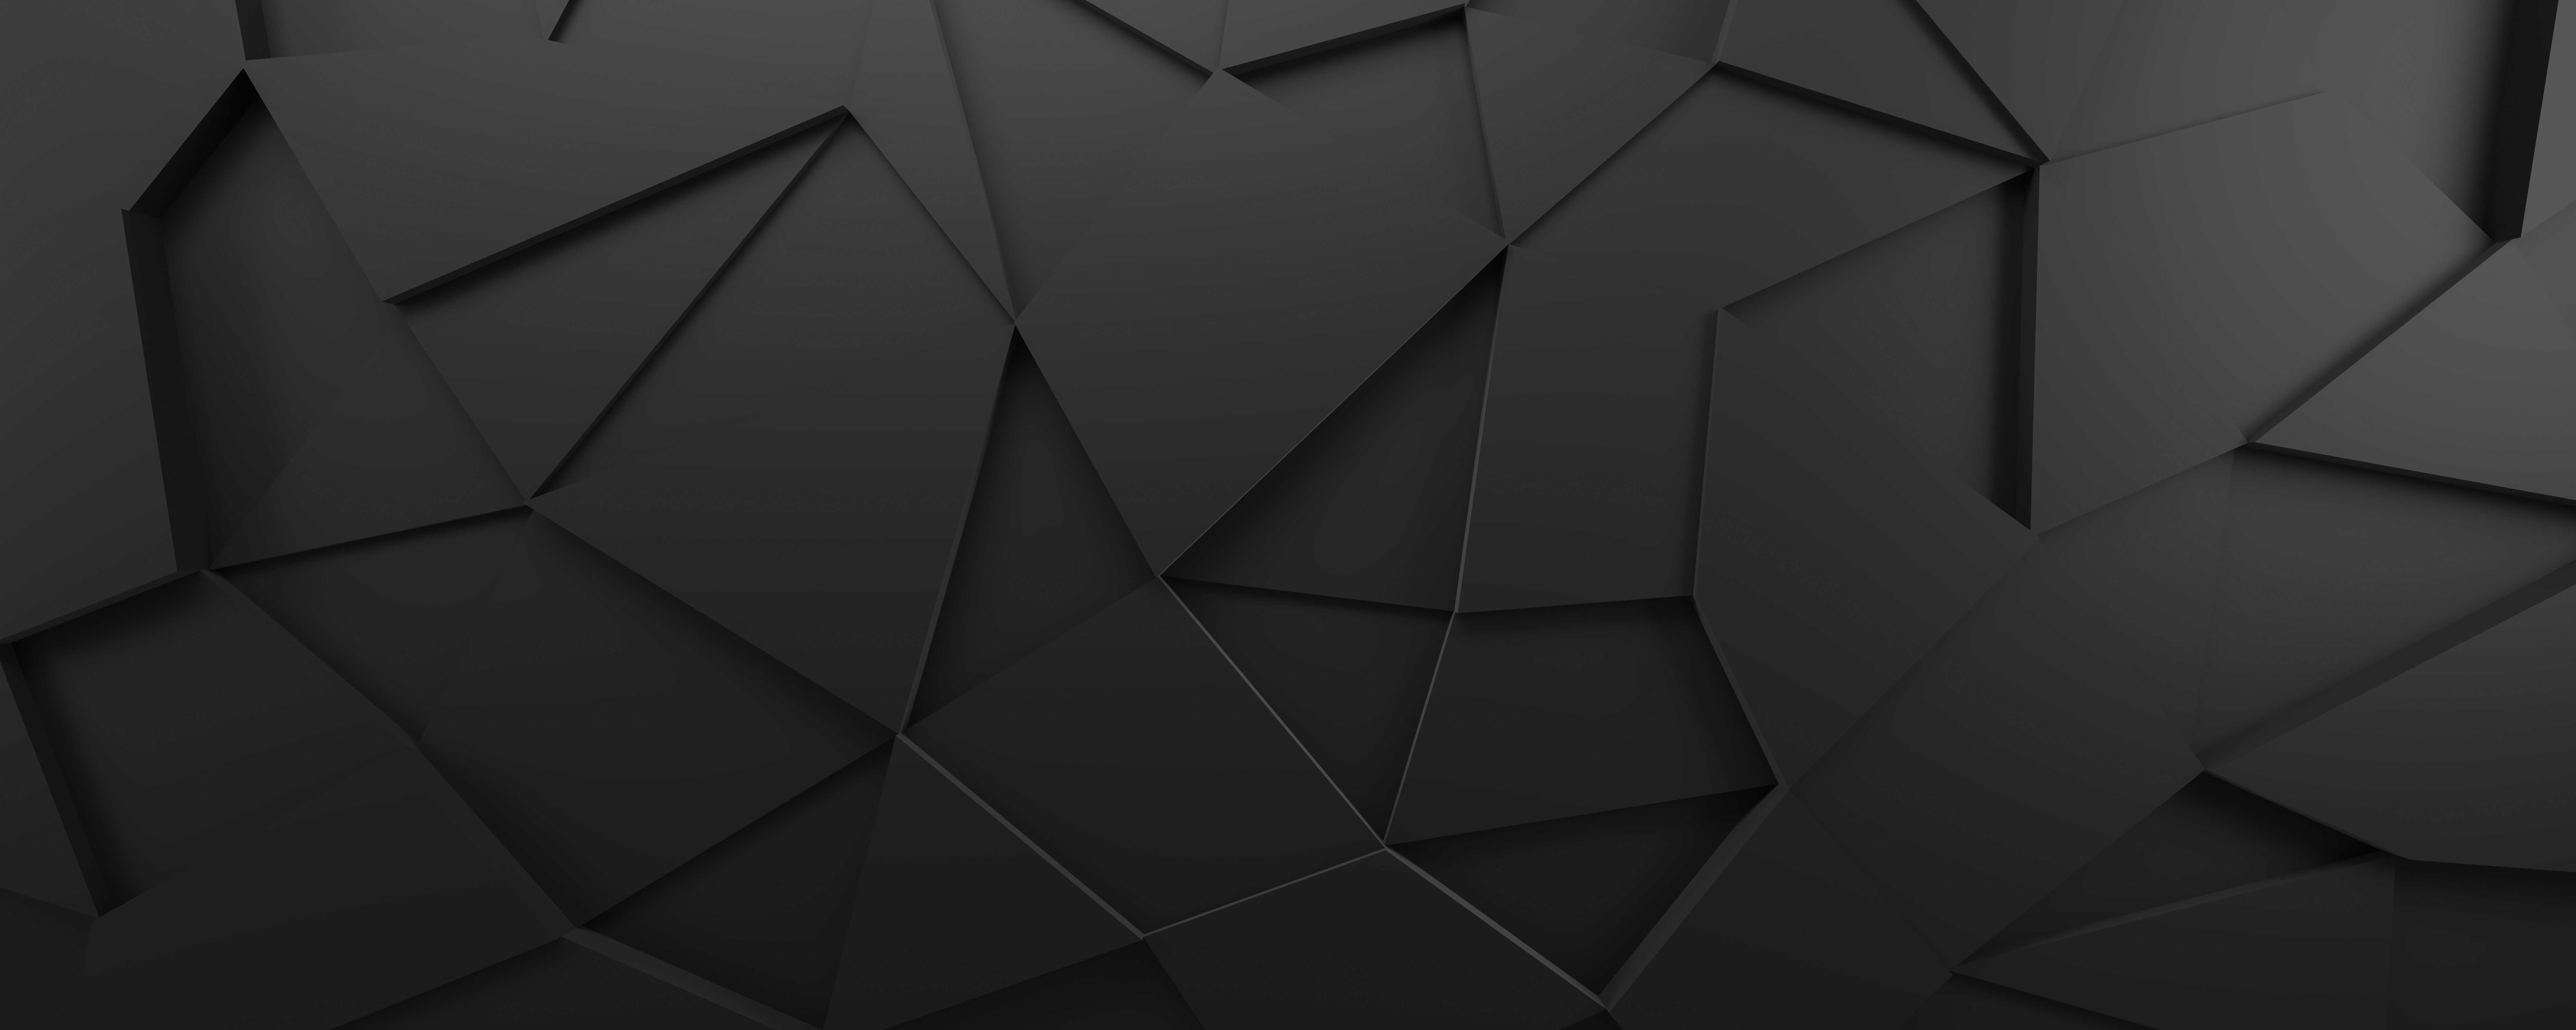 Background image: 3d black abstract shapes with sharp angles.